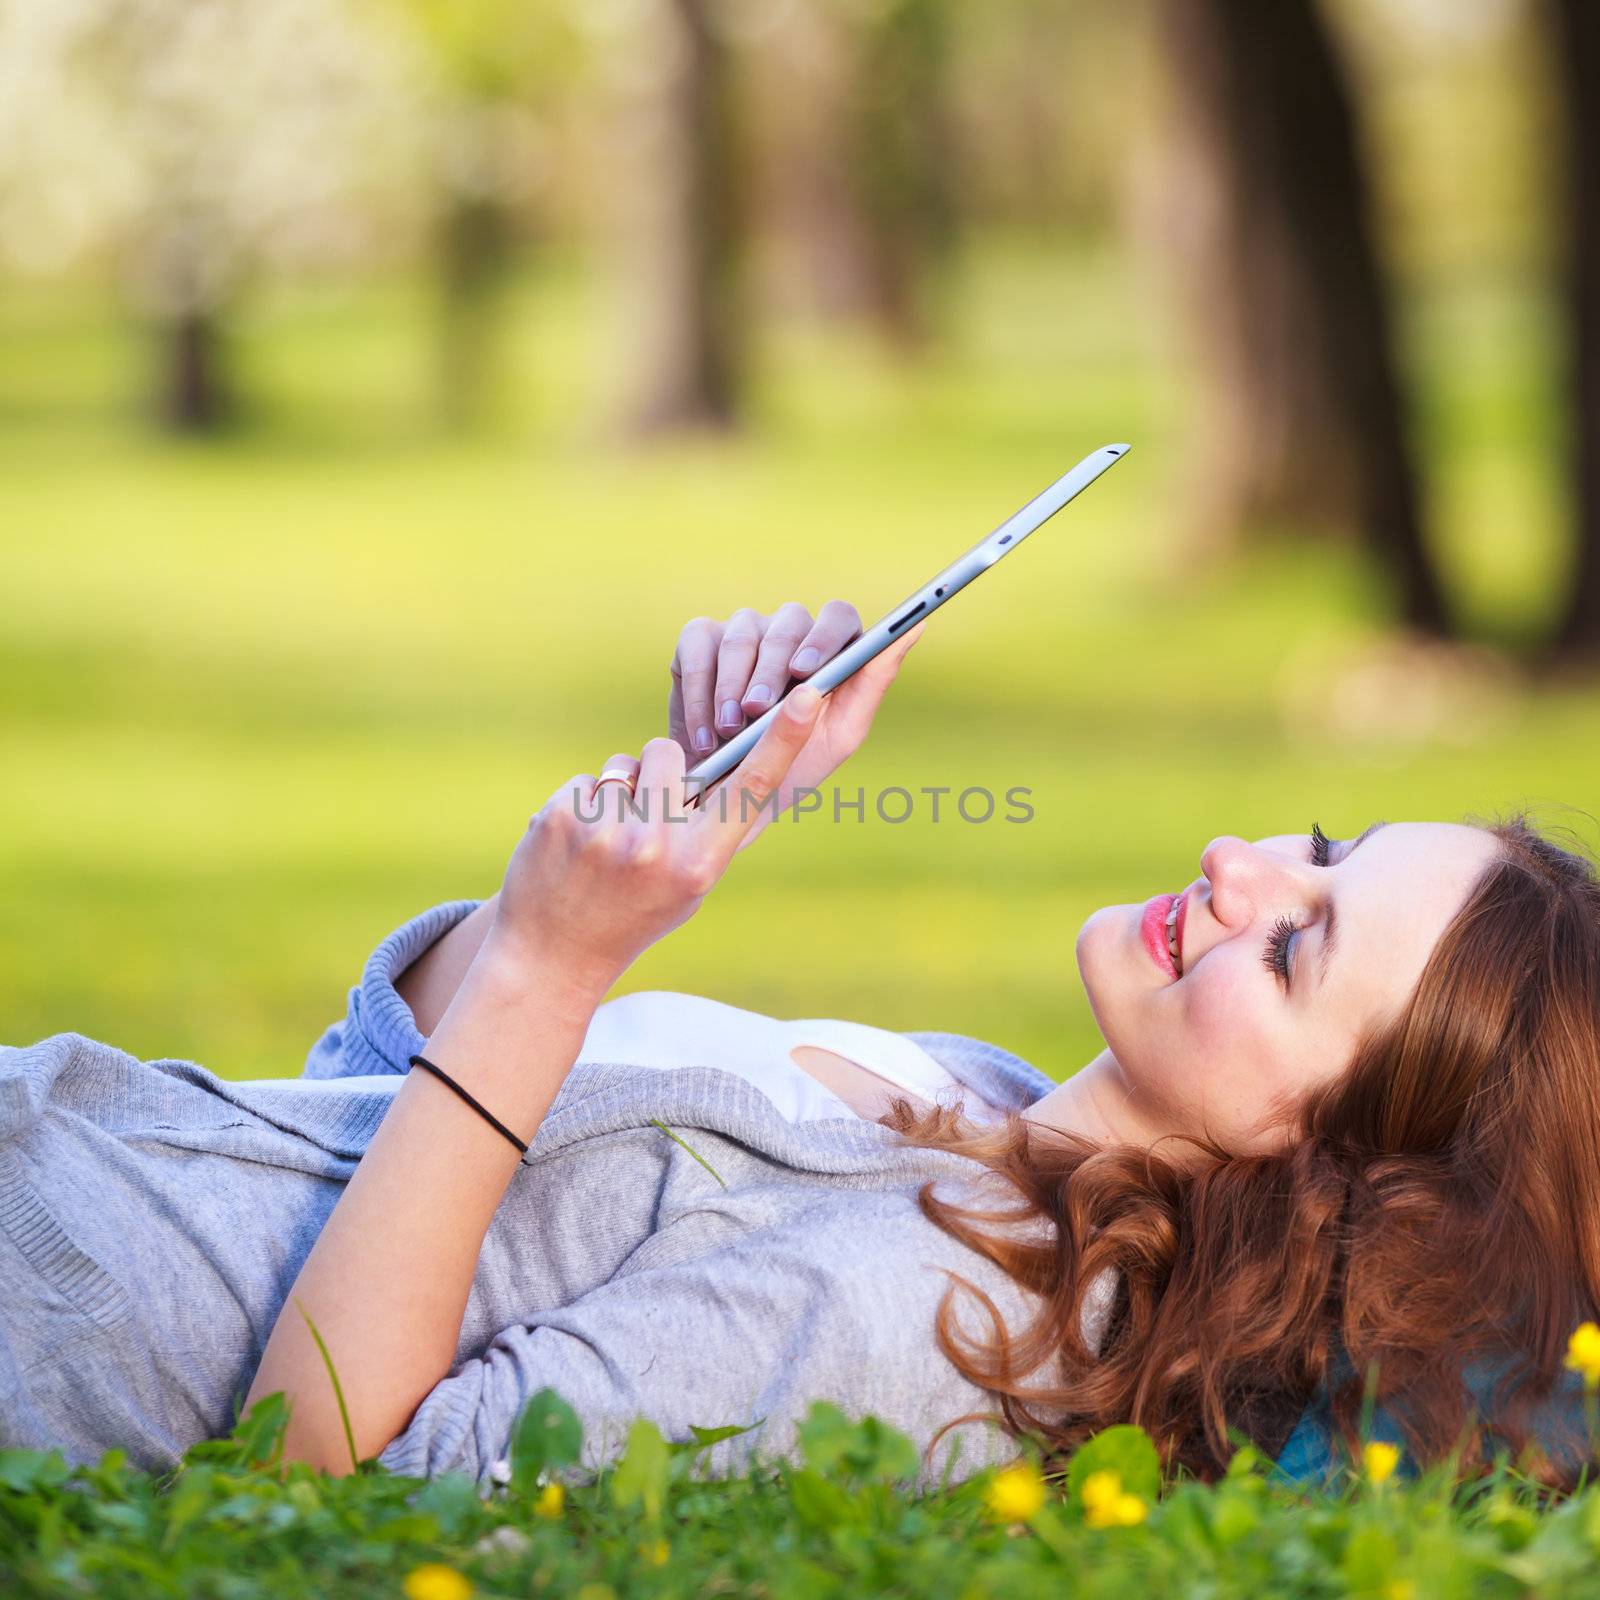 Young woman using her tablet computer while relaxing outdoors by viktor_cap